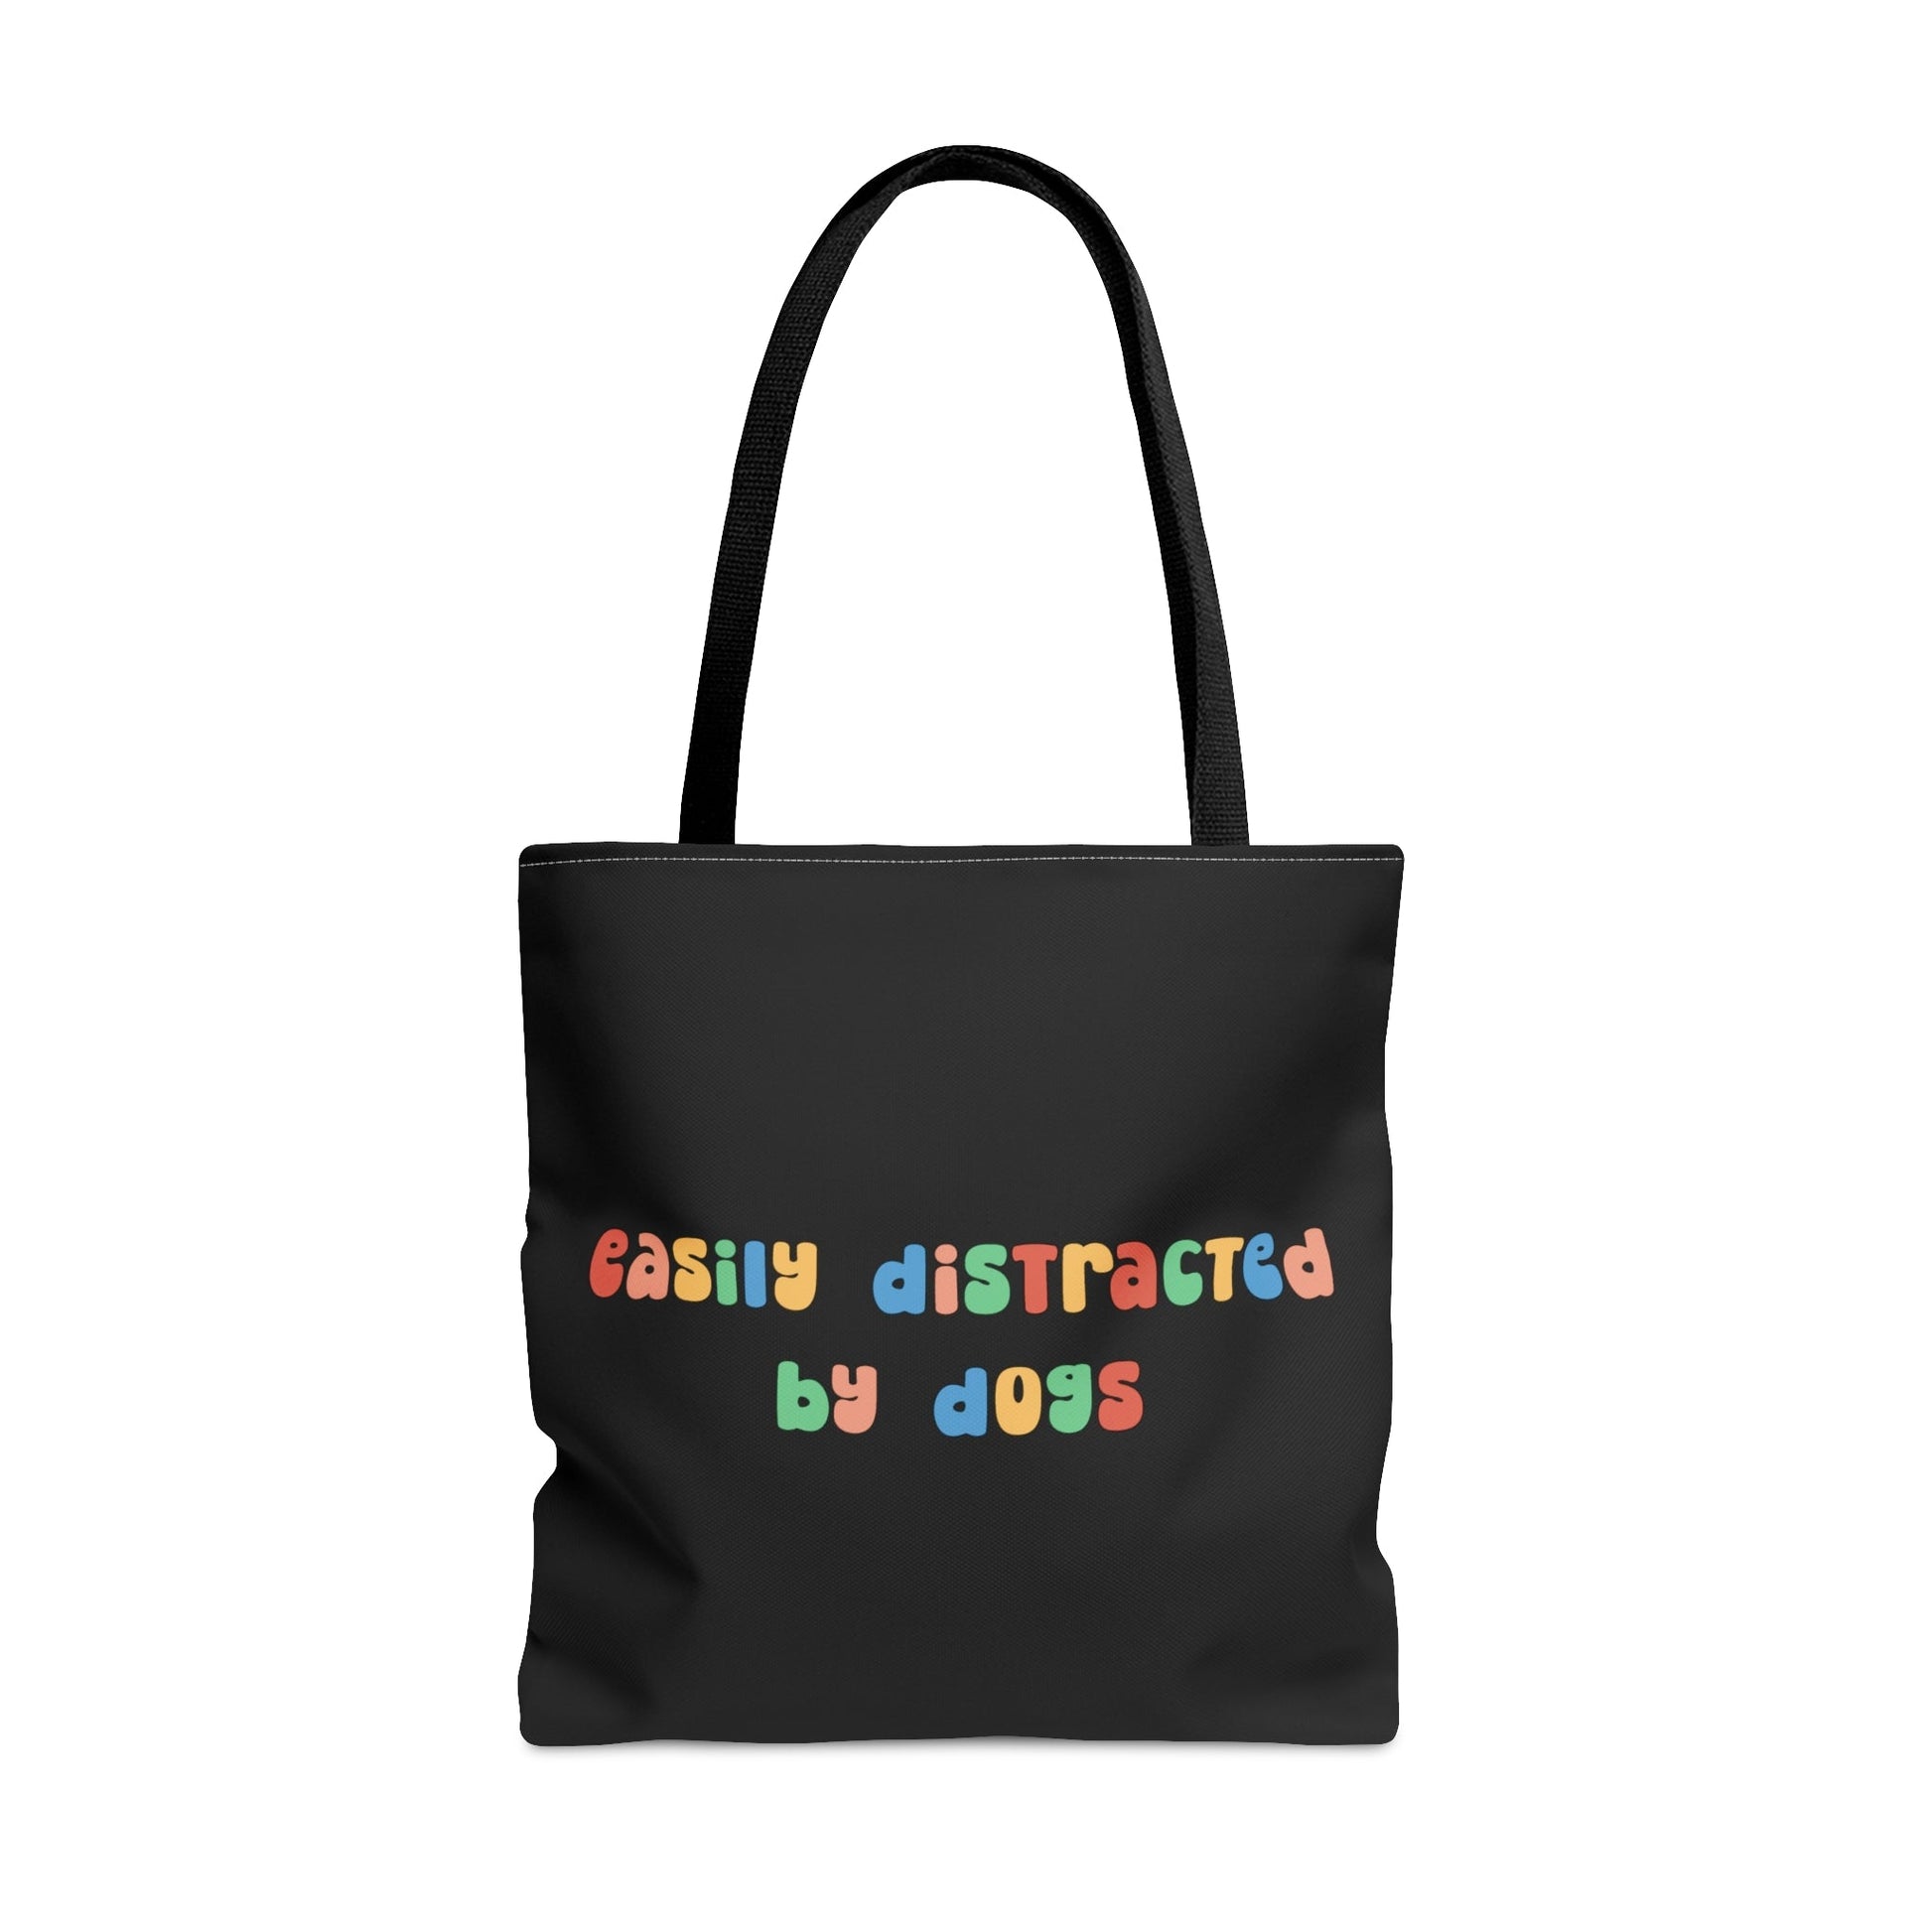 Easily Distracted by Dogs | Tote Bag - Detezi Designs-98211390803778515901